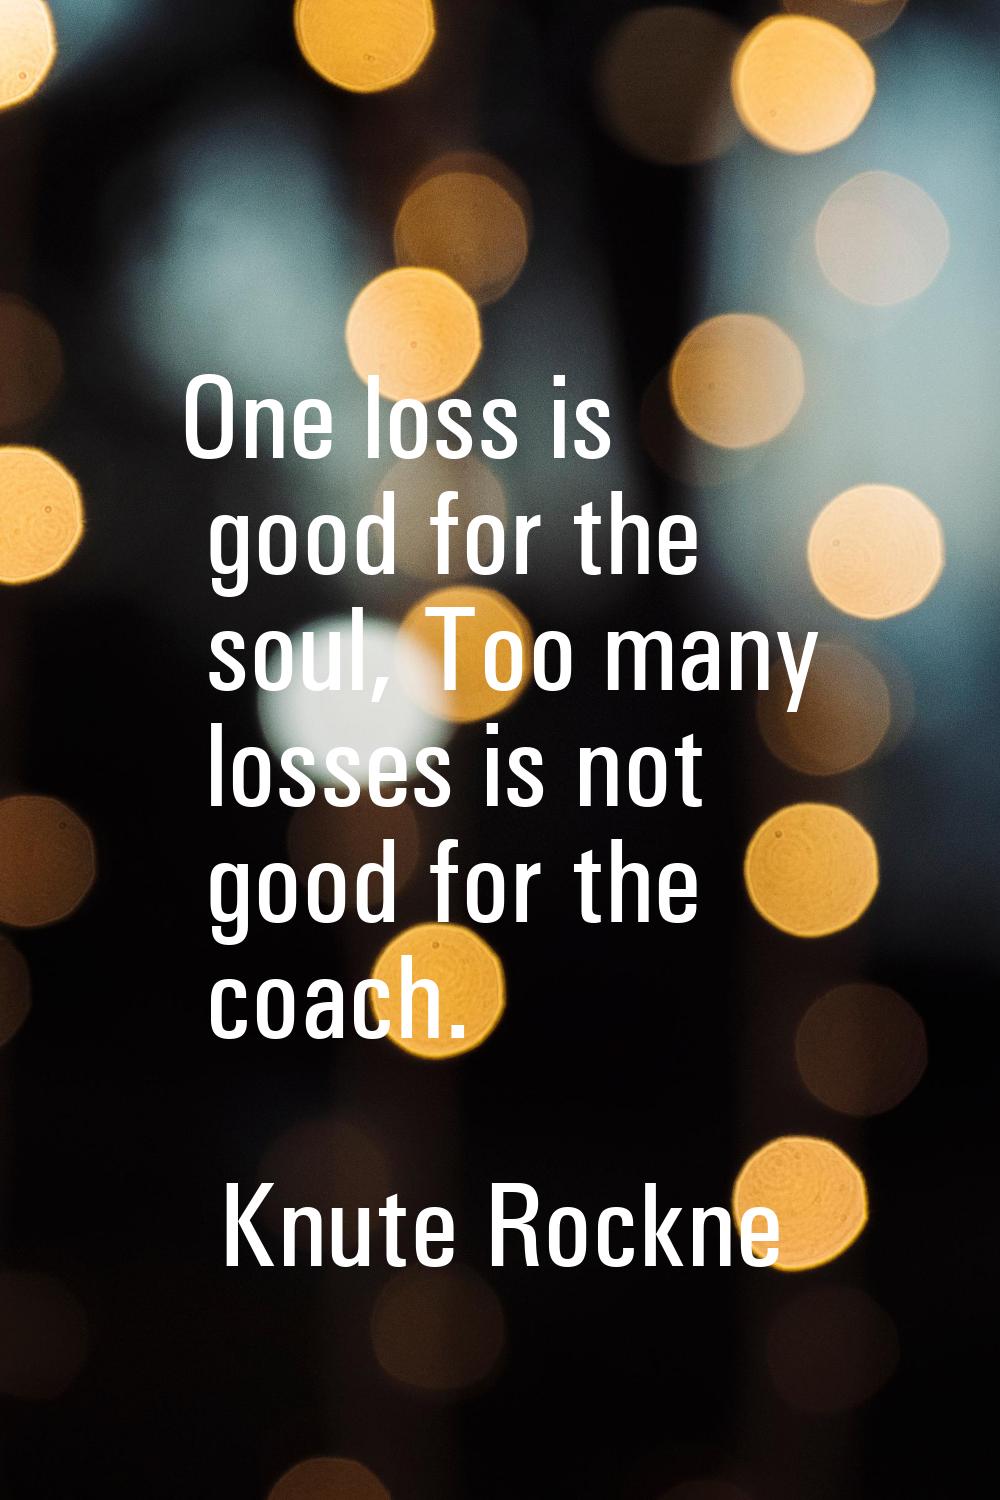 One loss is good for the soul, Too many losses is not good for the coach.